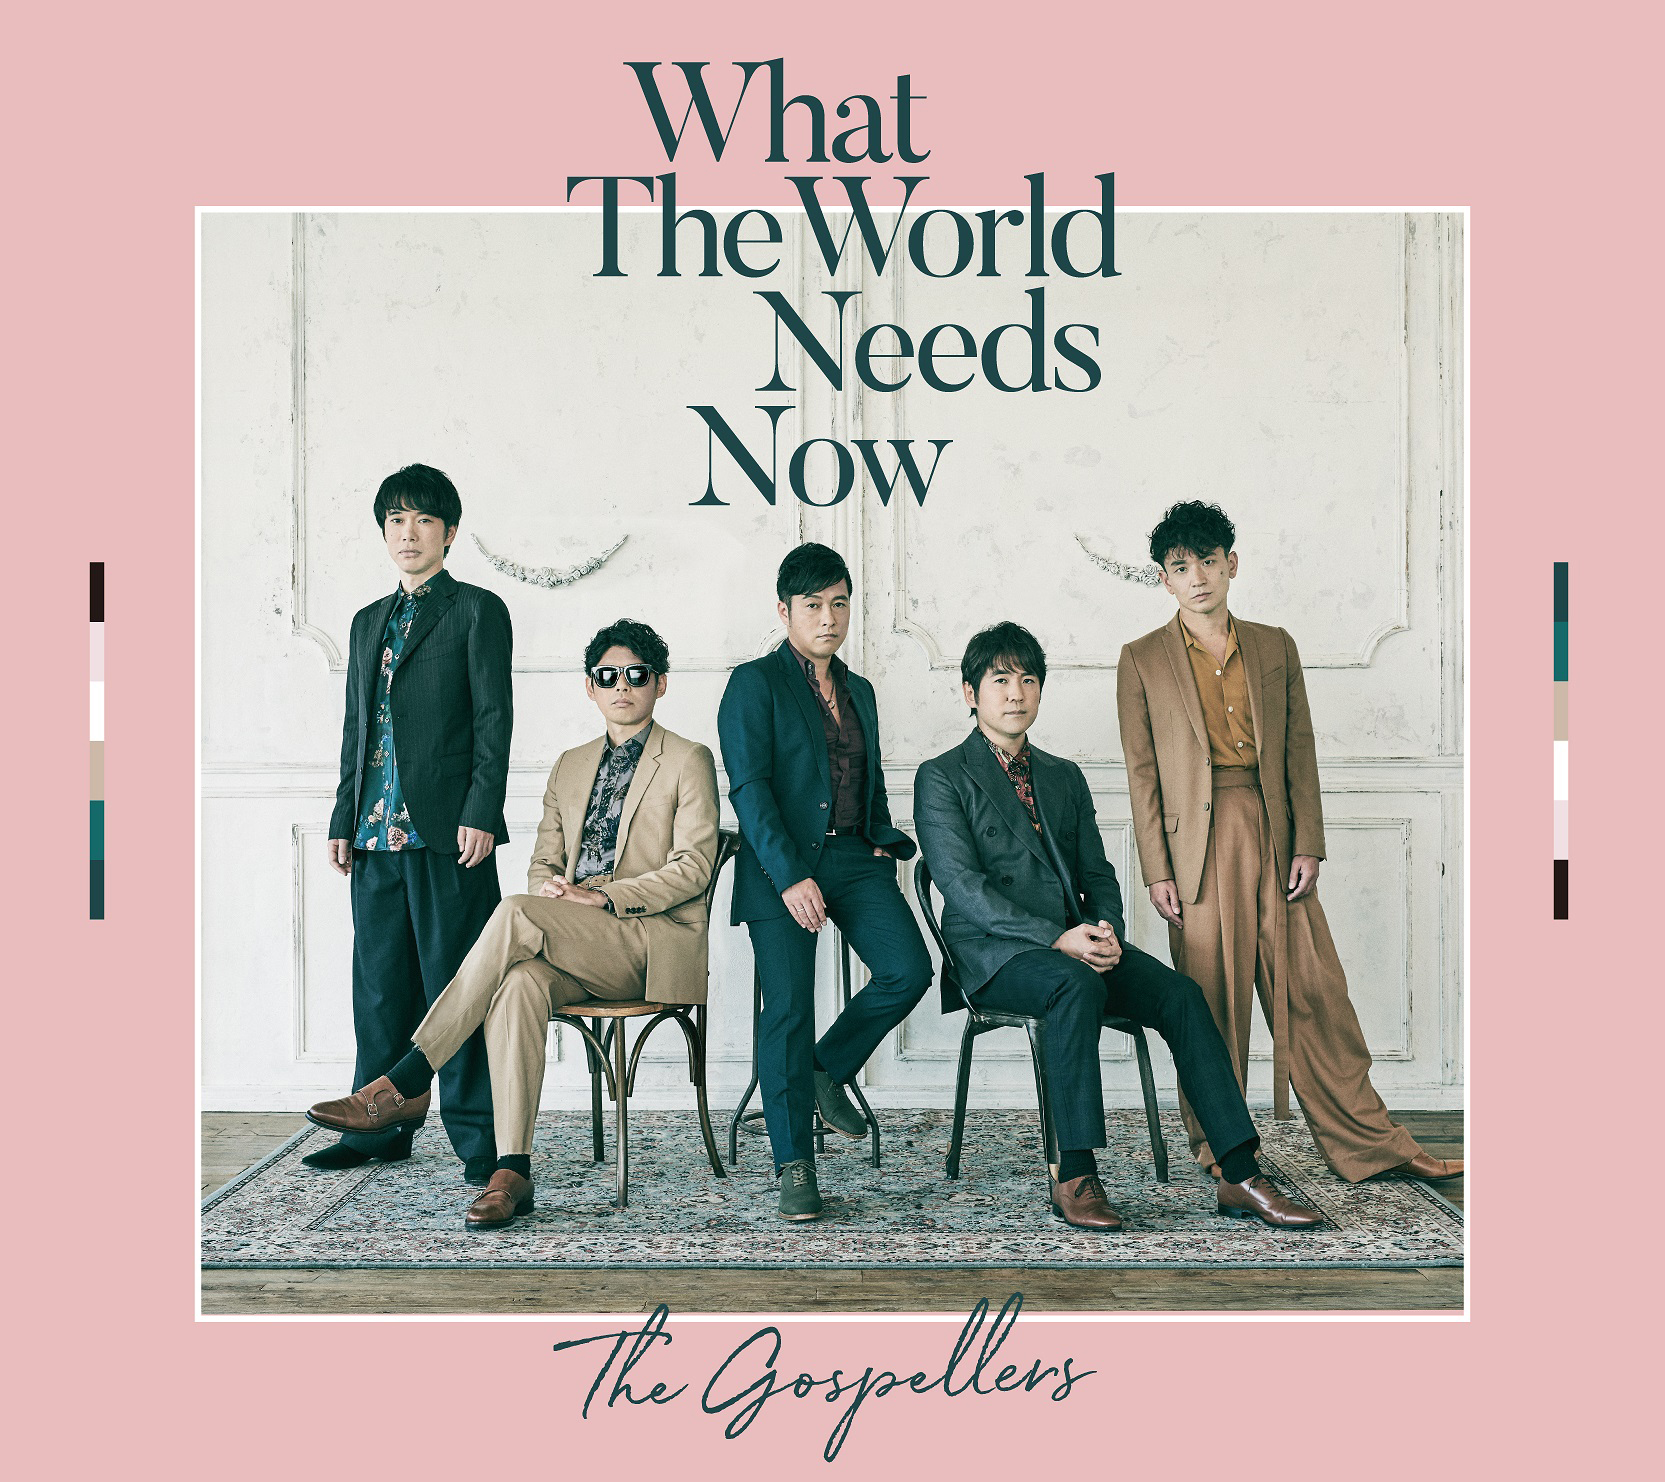 iڍ F THE GOSPELLERS(LP) WHAT THE WORLD NEEDS NOWy_E[htz